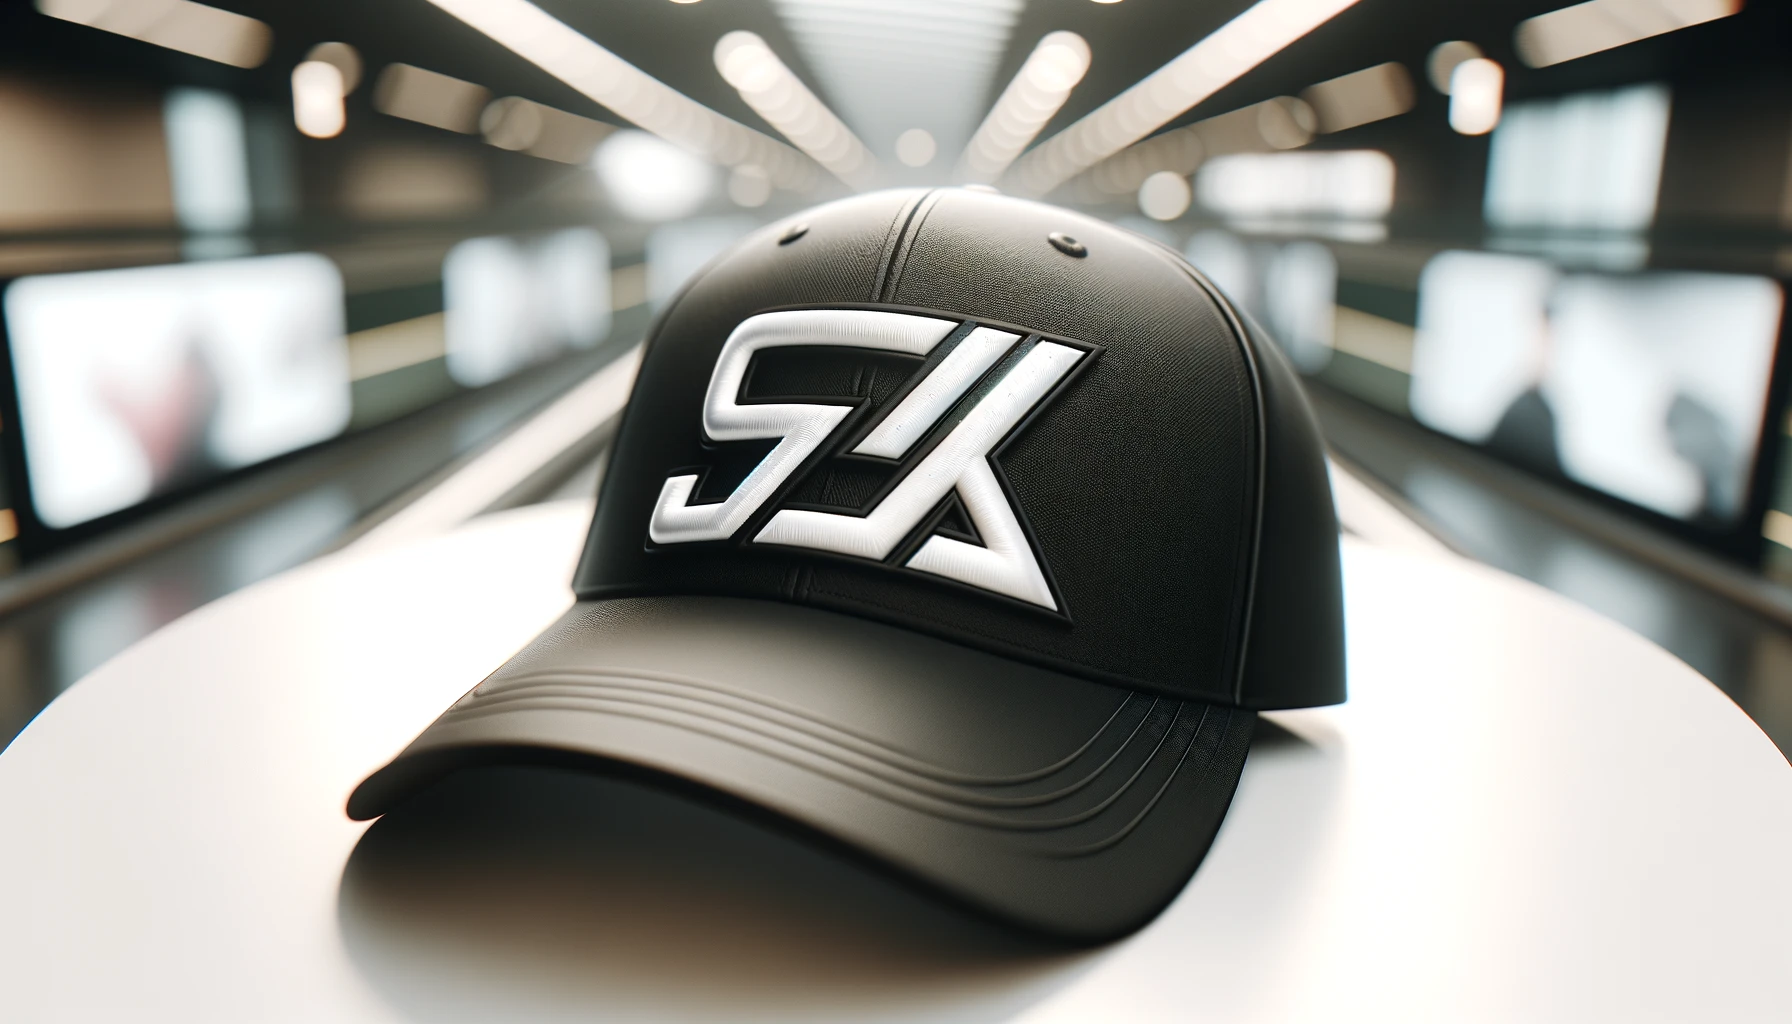 A popular cap with a large black and white logo in the center. The cap features 'SX' letters, with the logo either blurred, removed, or not visible from the angle. The cap is displayed in a modern, stylish setting, highlighting its trendiness.